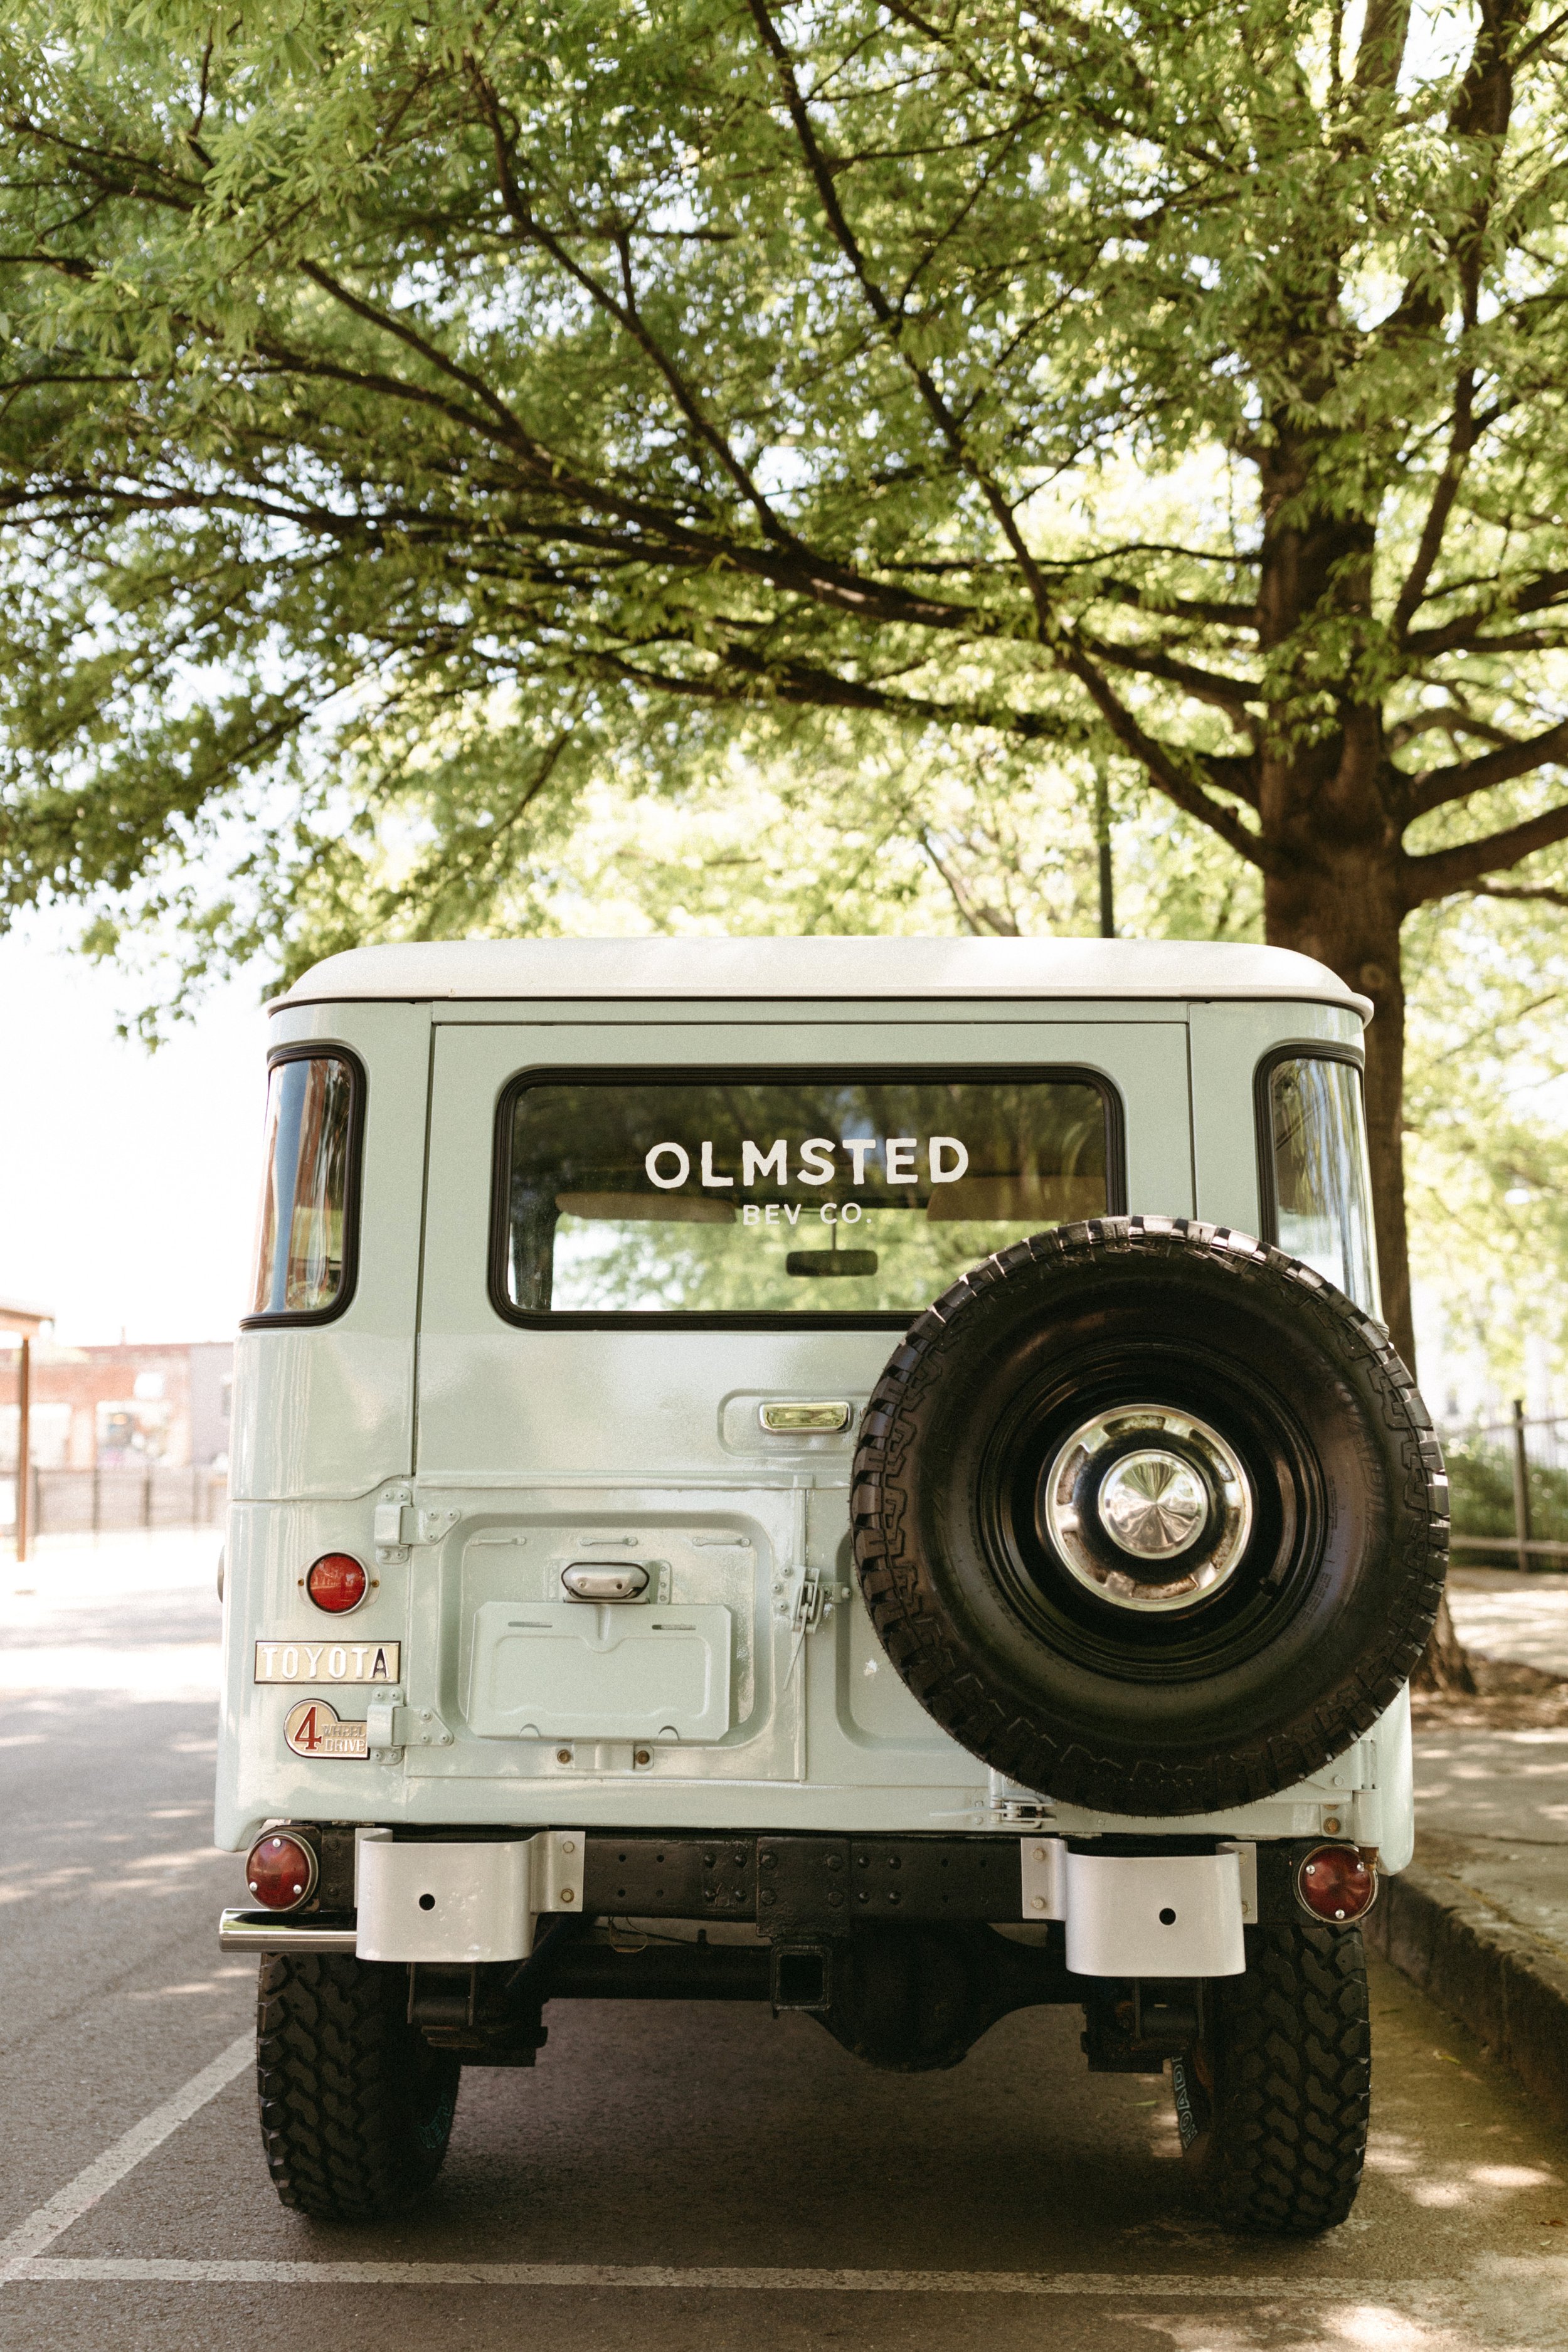 olsted-tap-truck-branding-session-knoxville-tori-lynne-photography-41.jpg